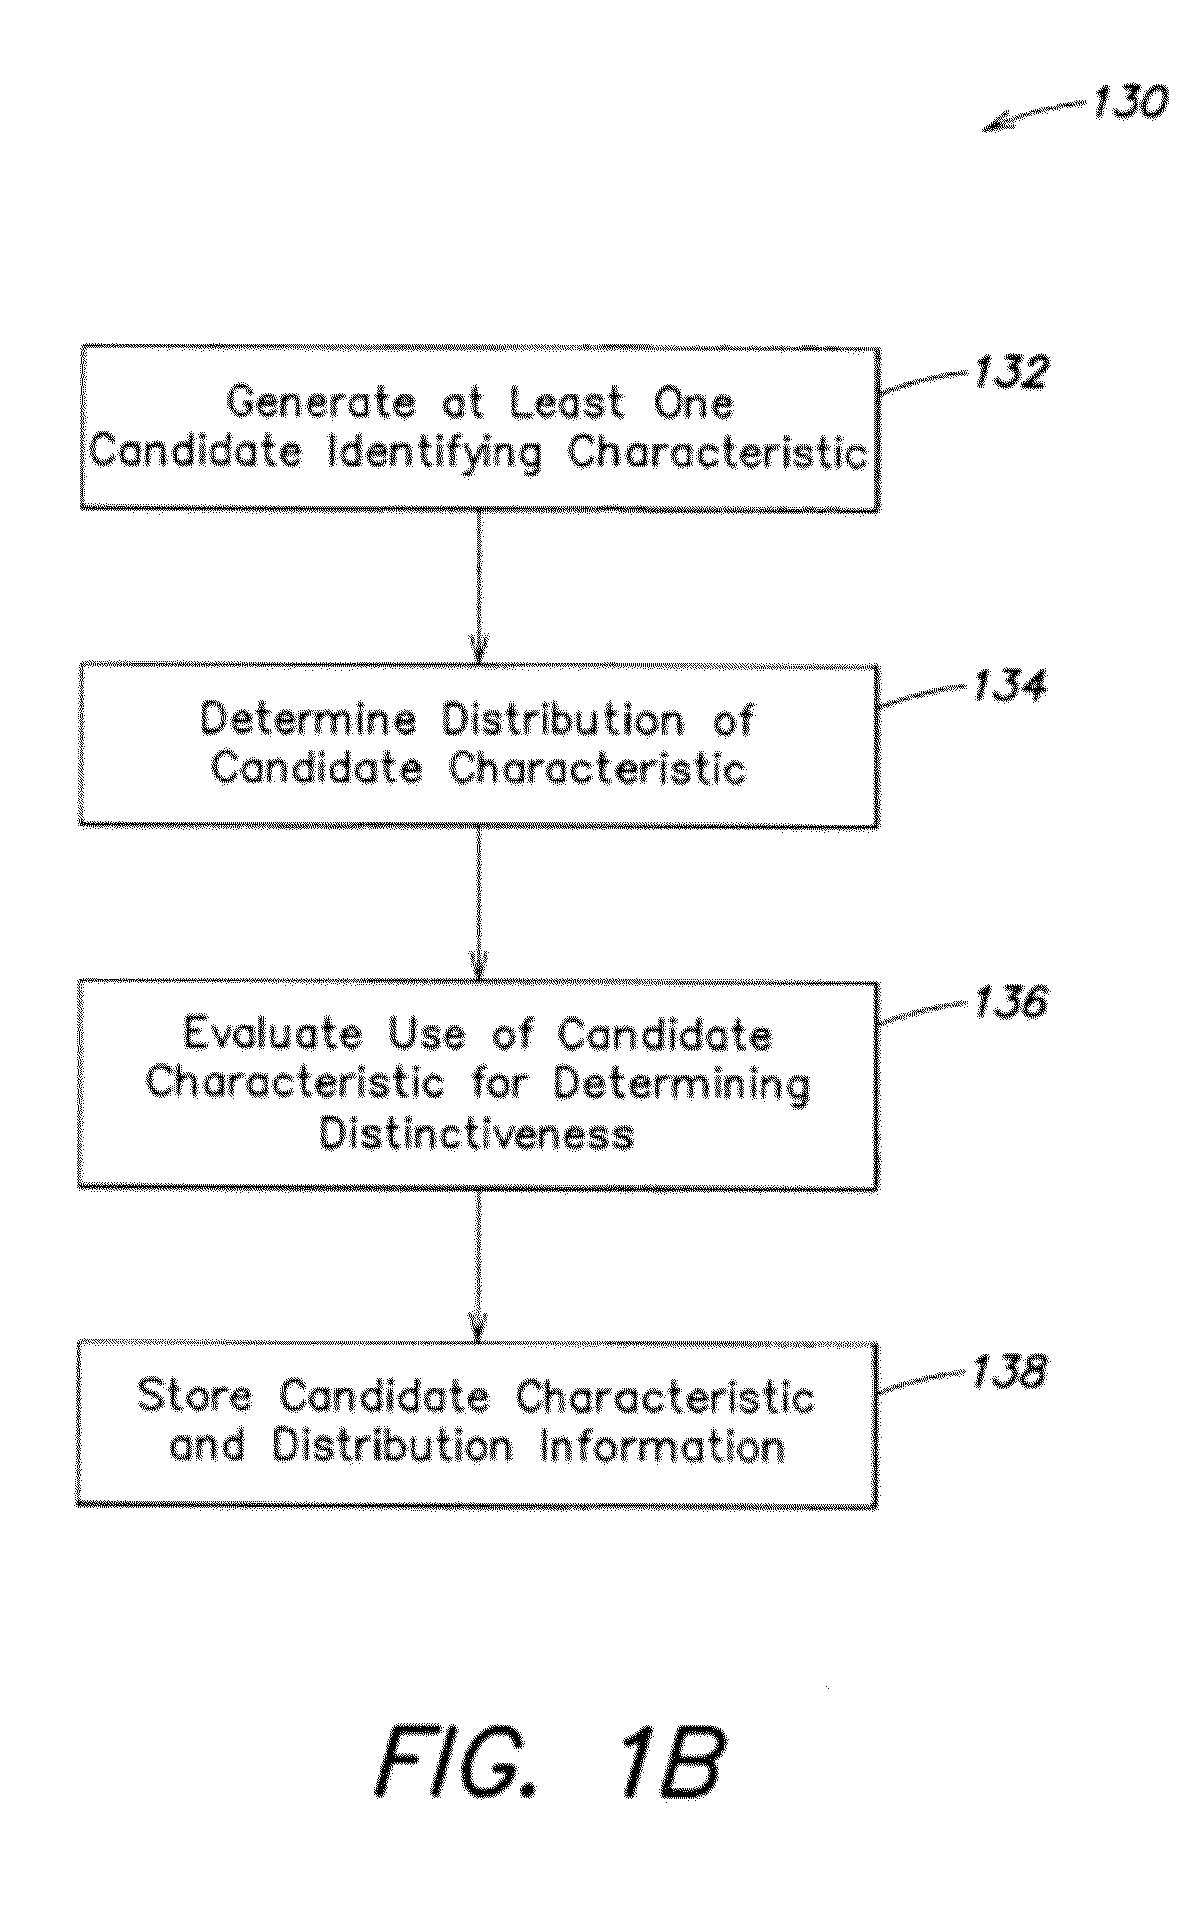 Visualization of concepts within a collection of information